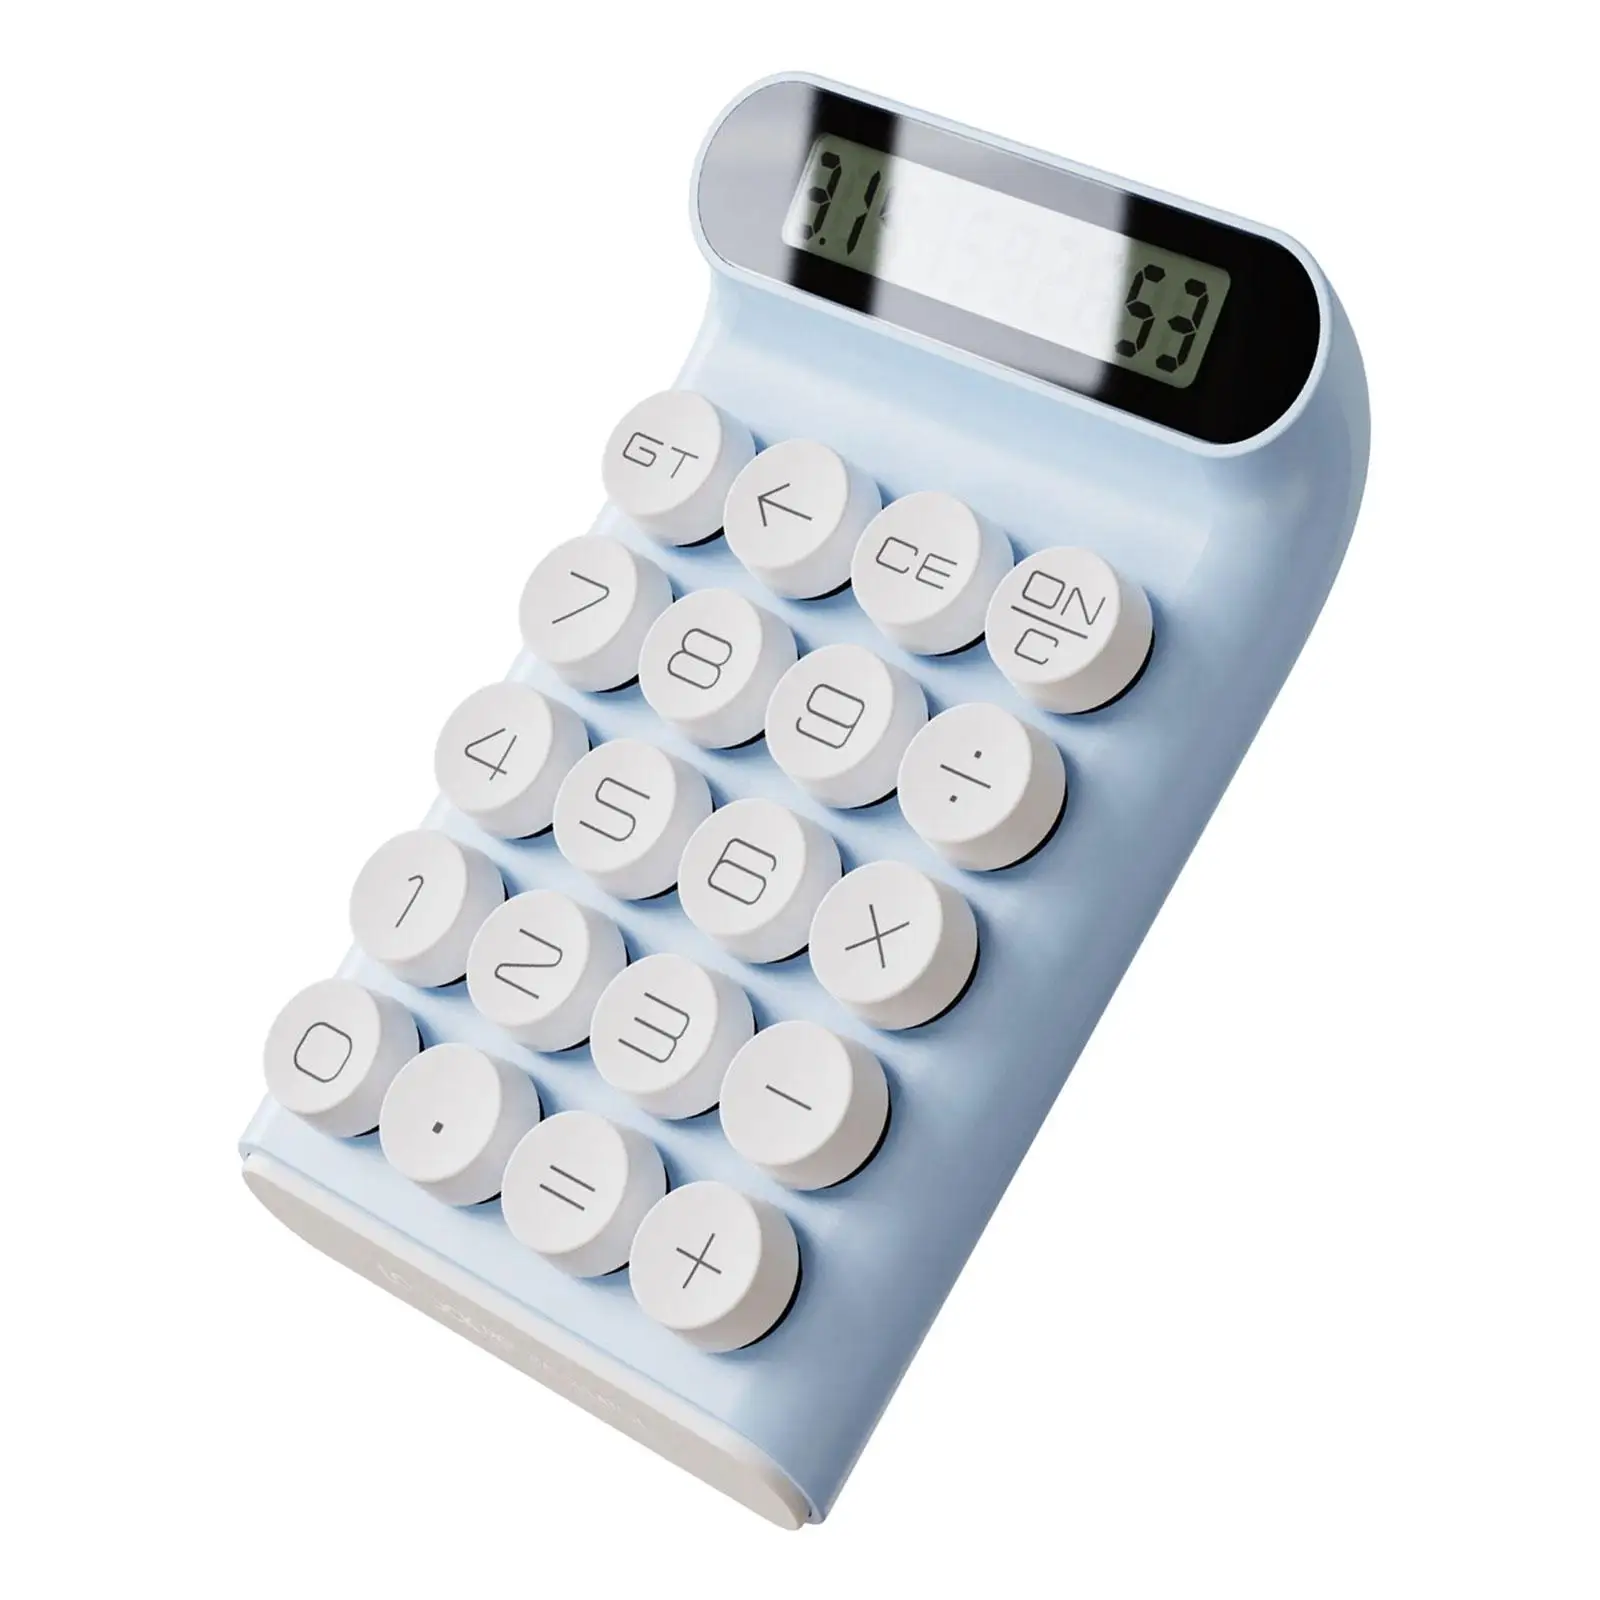 Handheld Mechanical Switch Calculator Exquisite Decoration for Young People Basic Office Calculator 10 Digit Display LCD Display